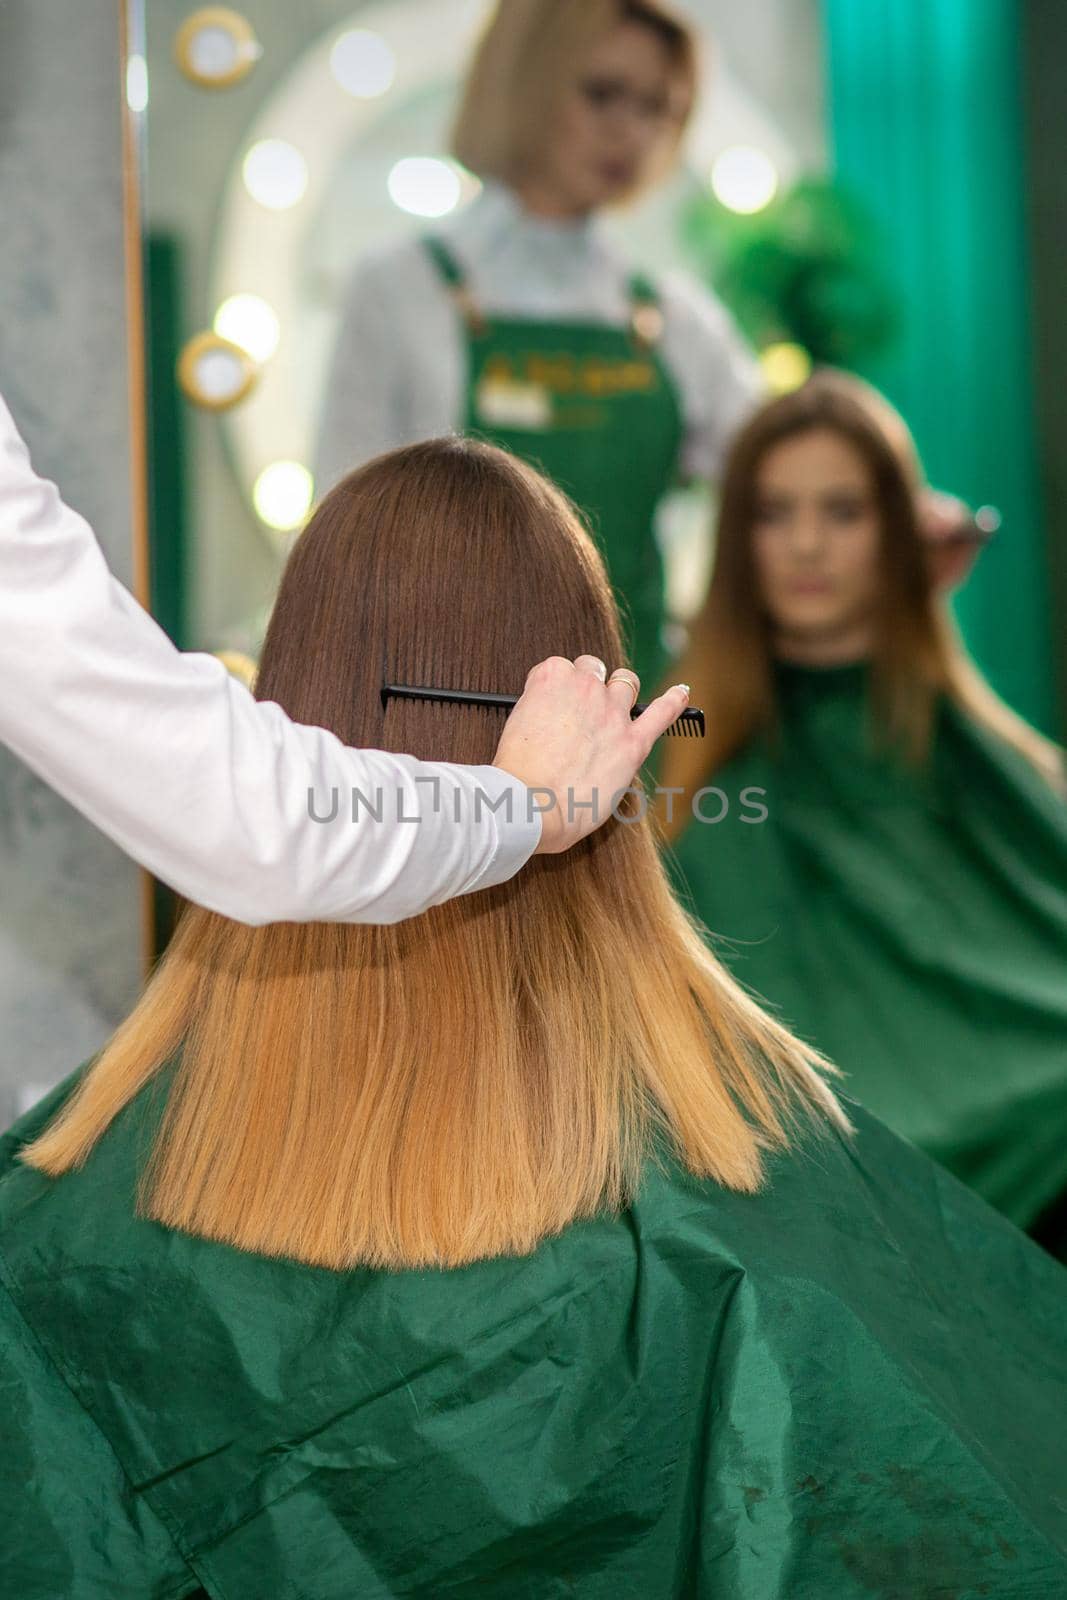 A female hairdresser is combing the long brown hair of a young woman at a parlor